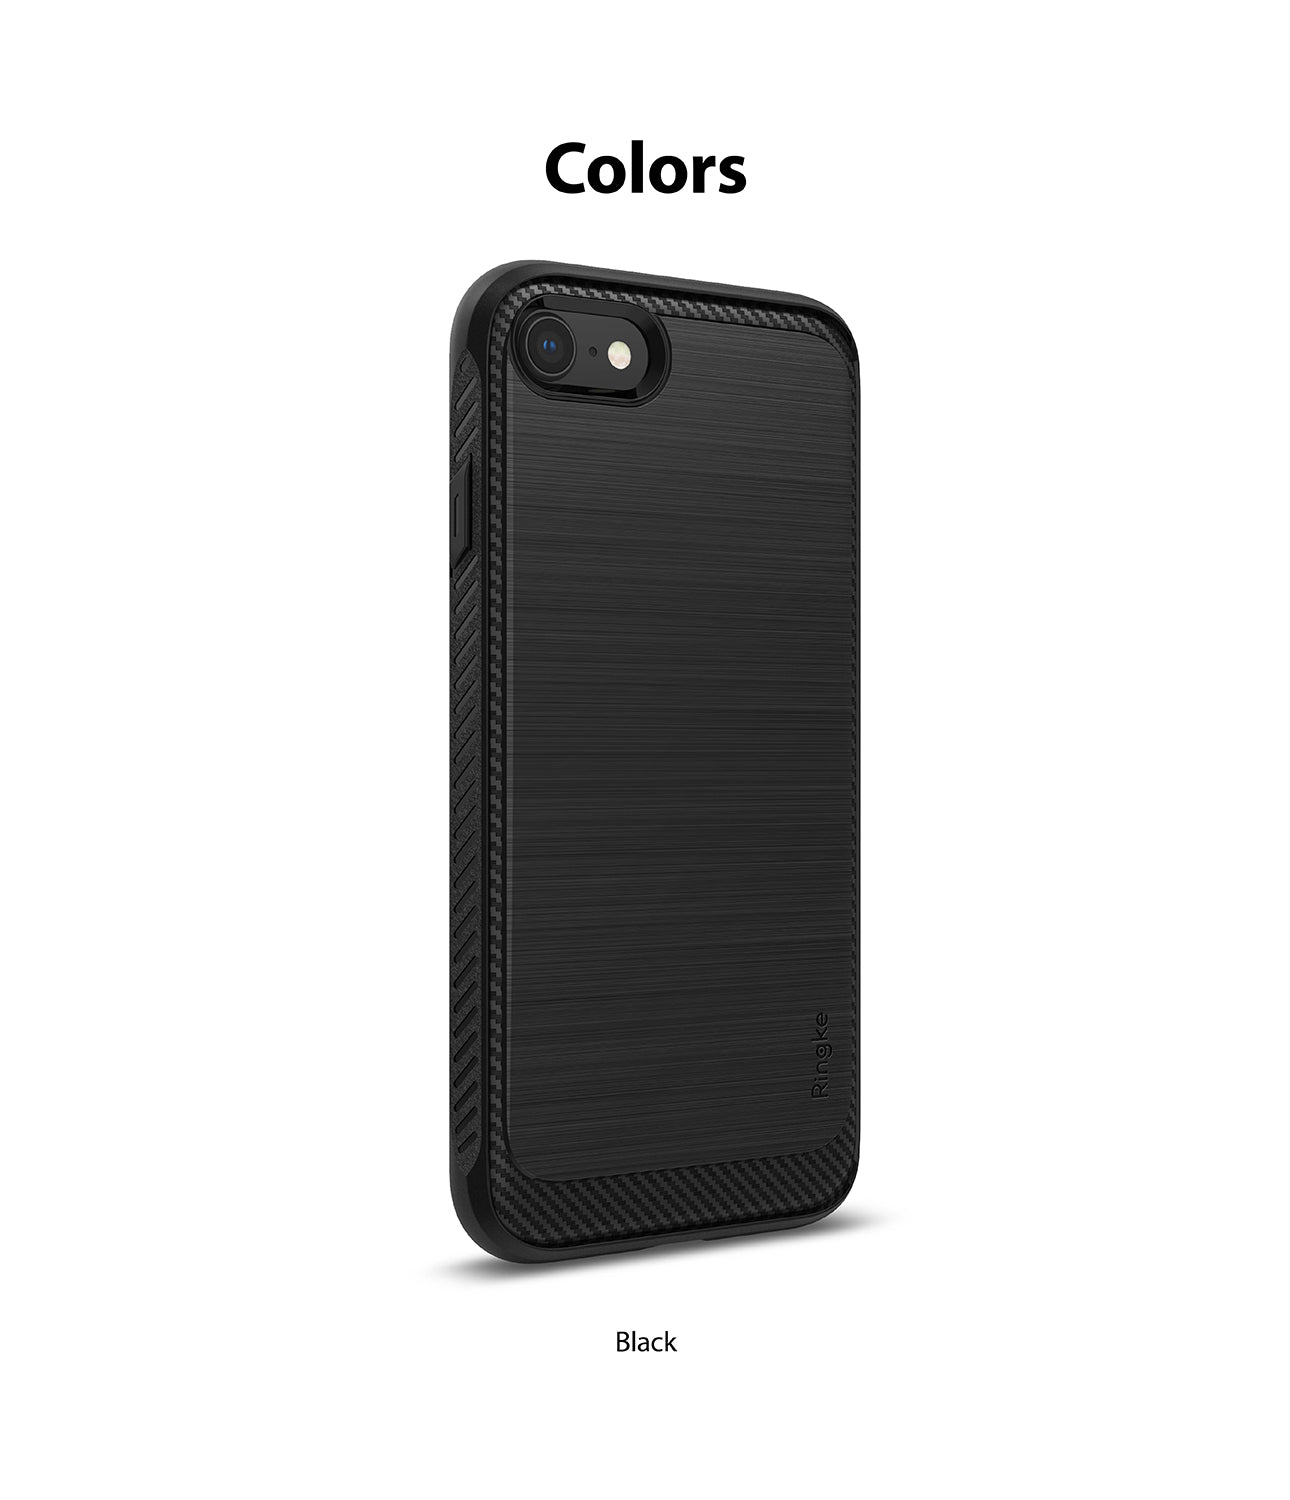 iPhone 7 / 8 / SE 2020 Case | Onyx - Ringke Official Store